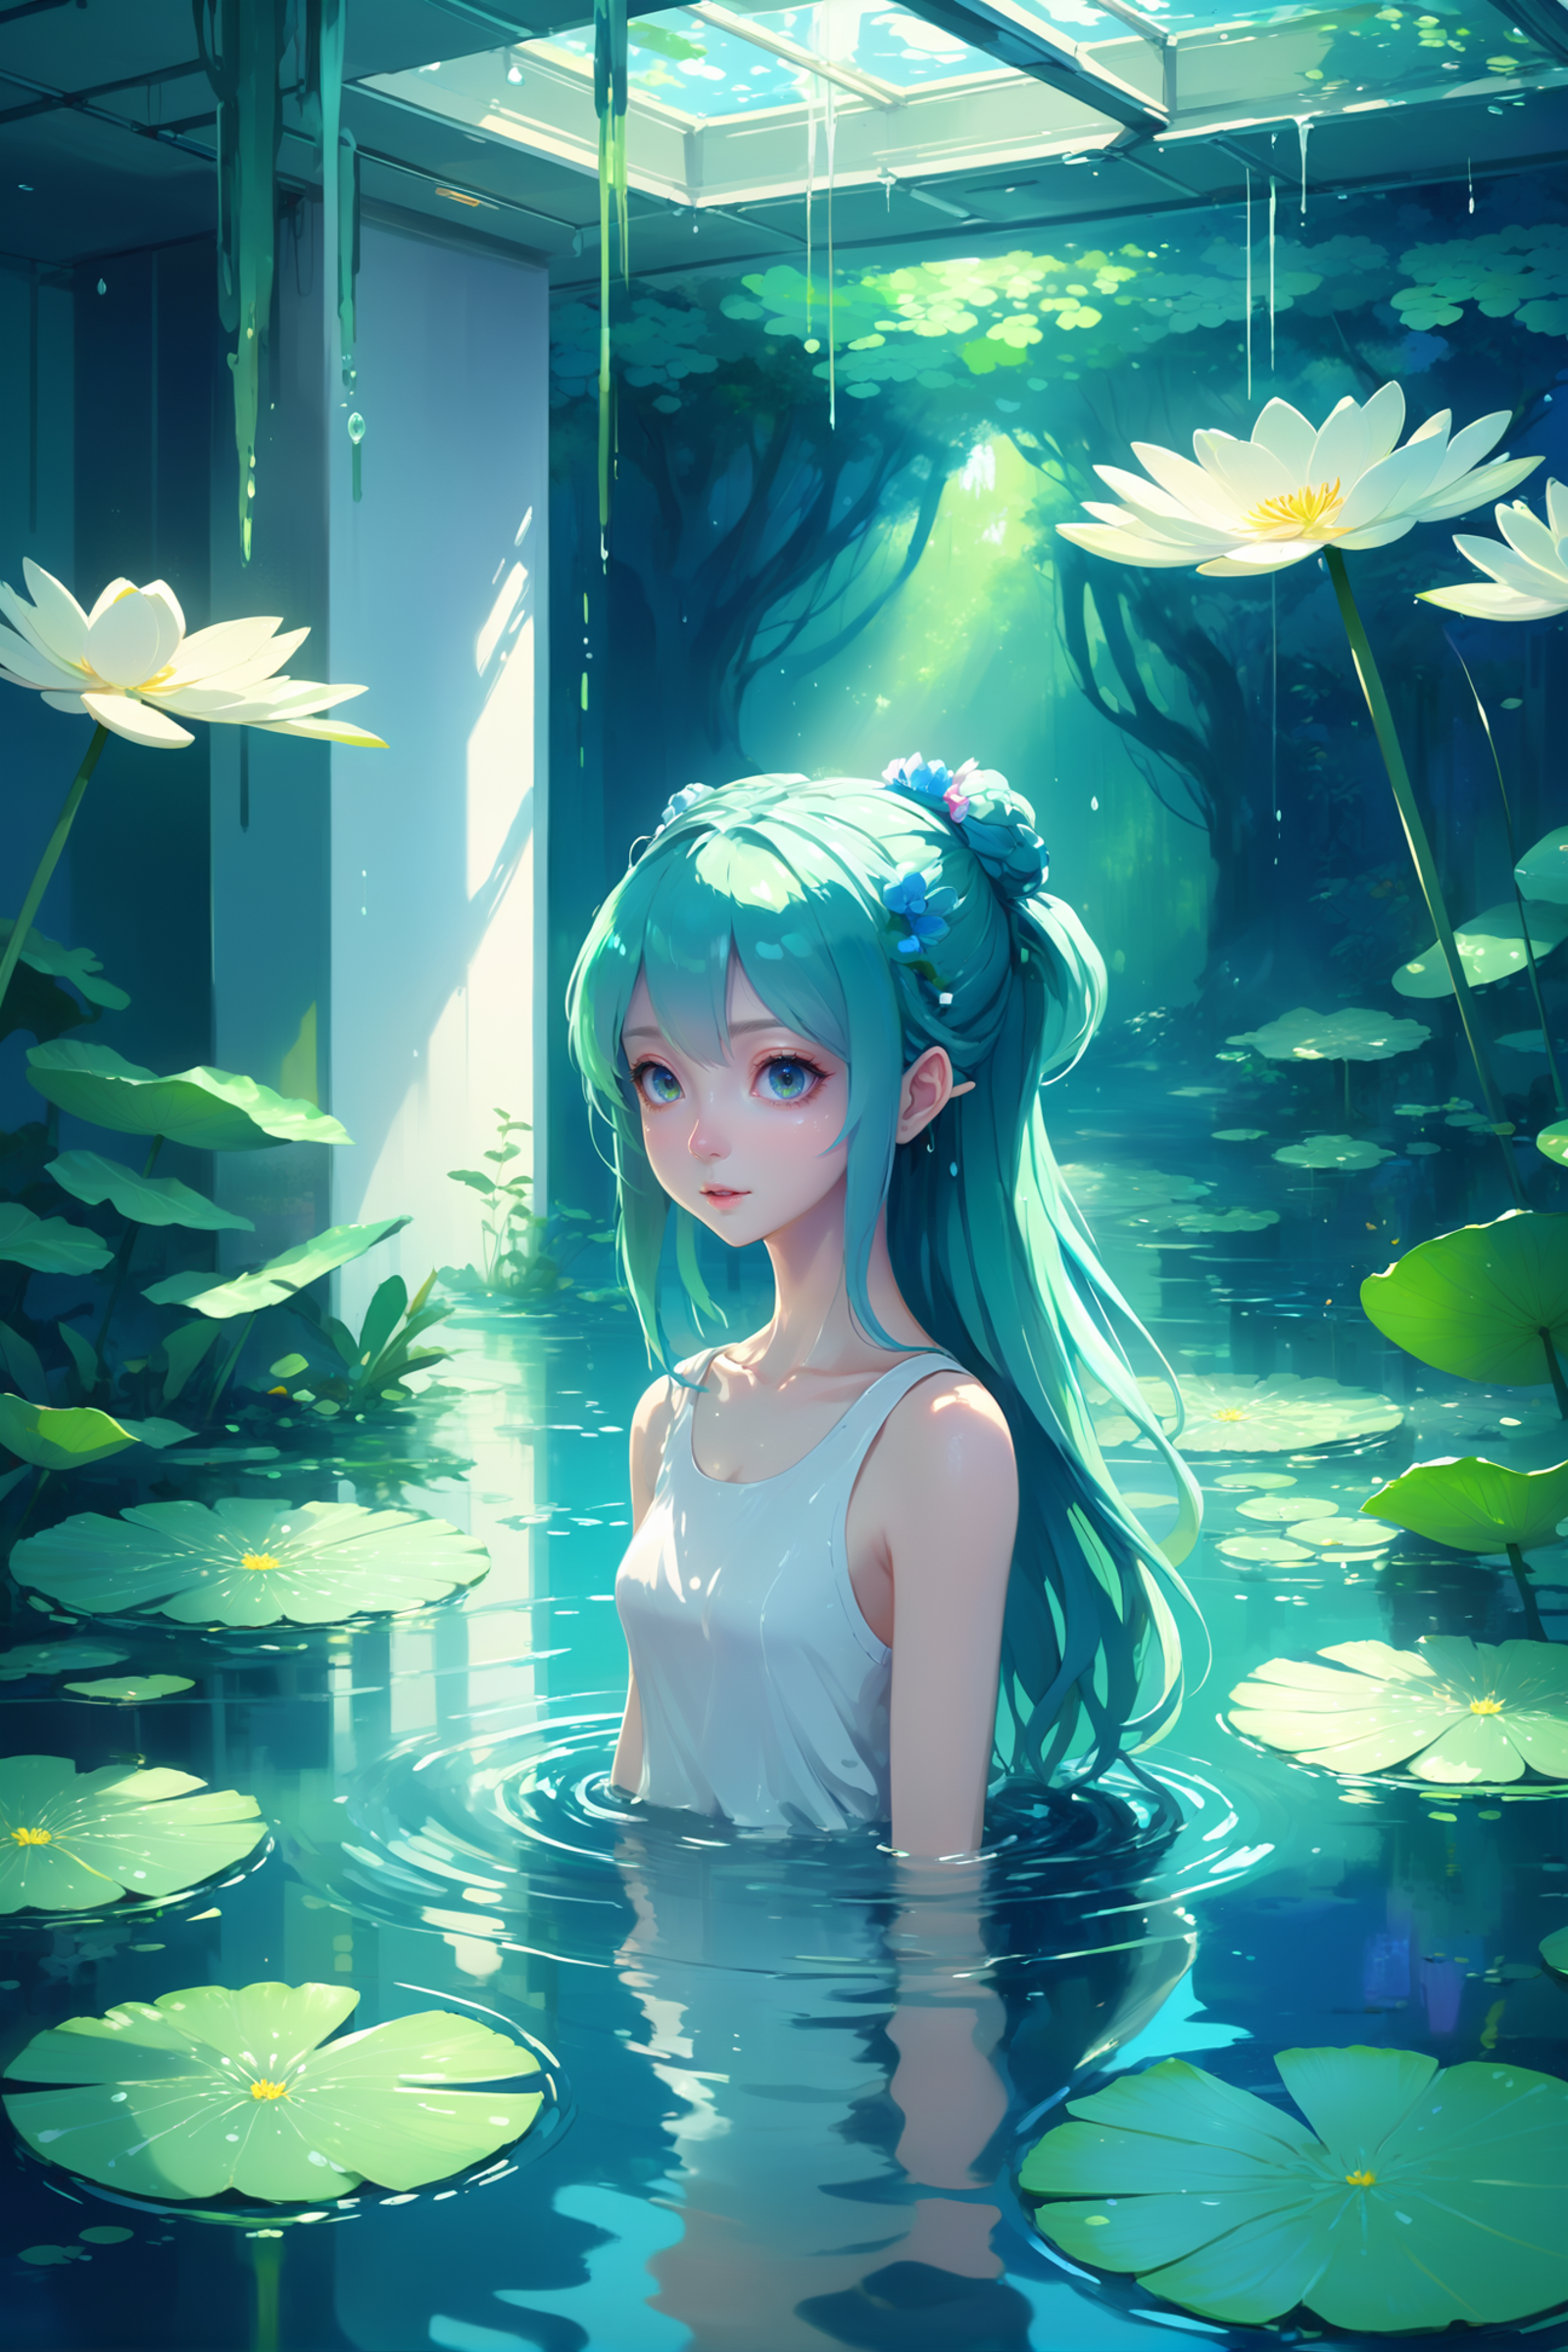 Water Nymph: An Anime-Inspired Artwork of a Mermaid in a Forest Pond